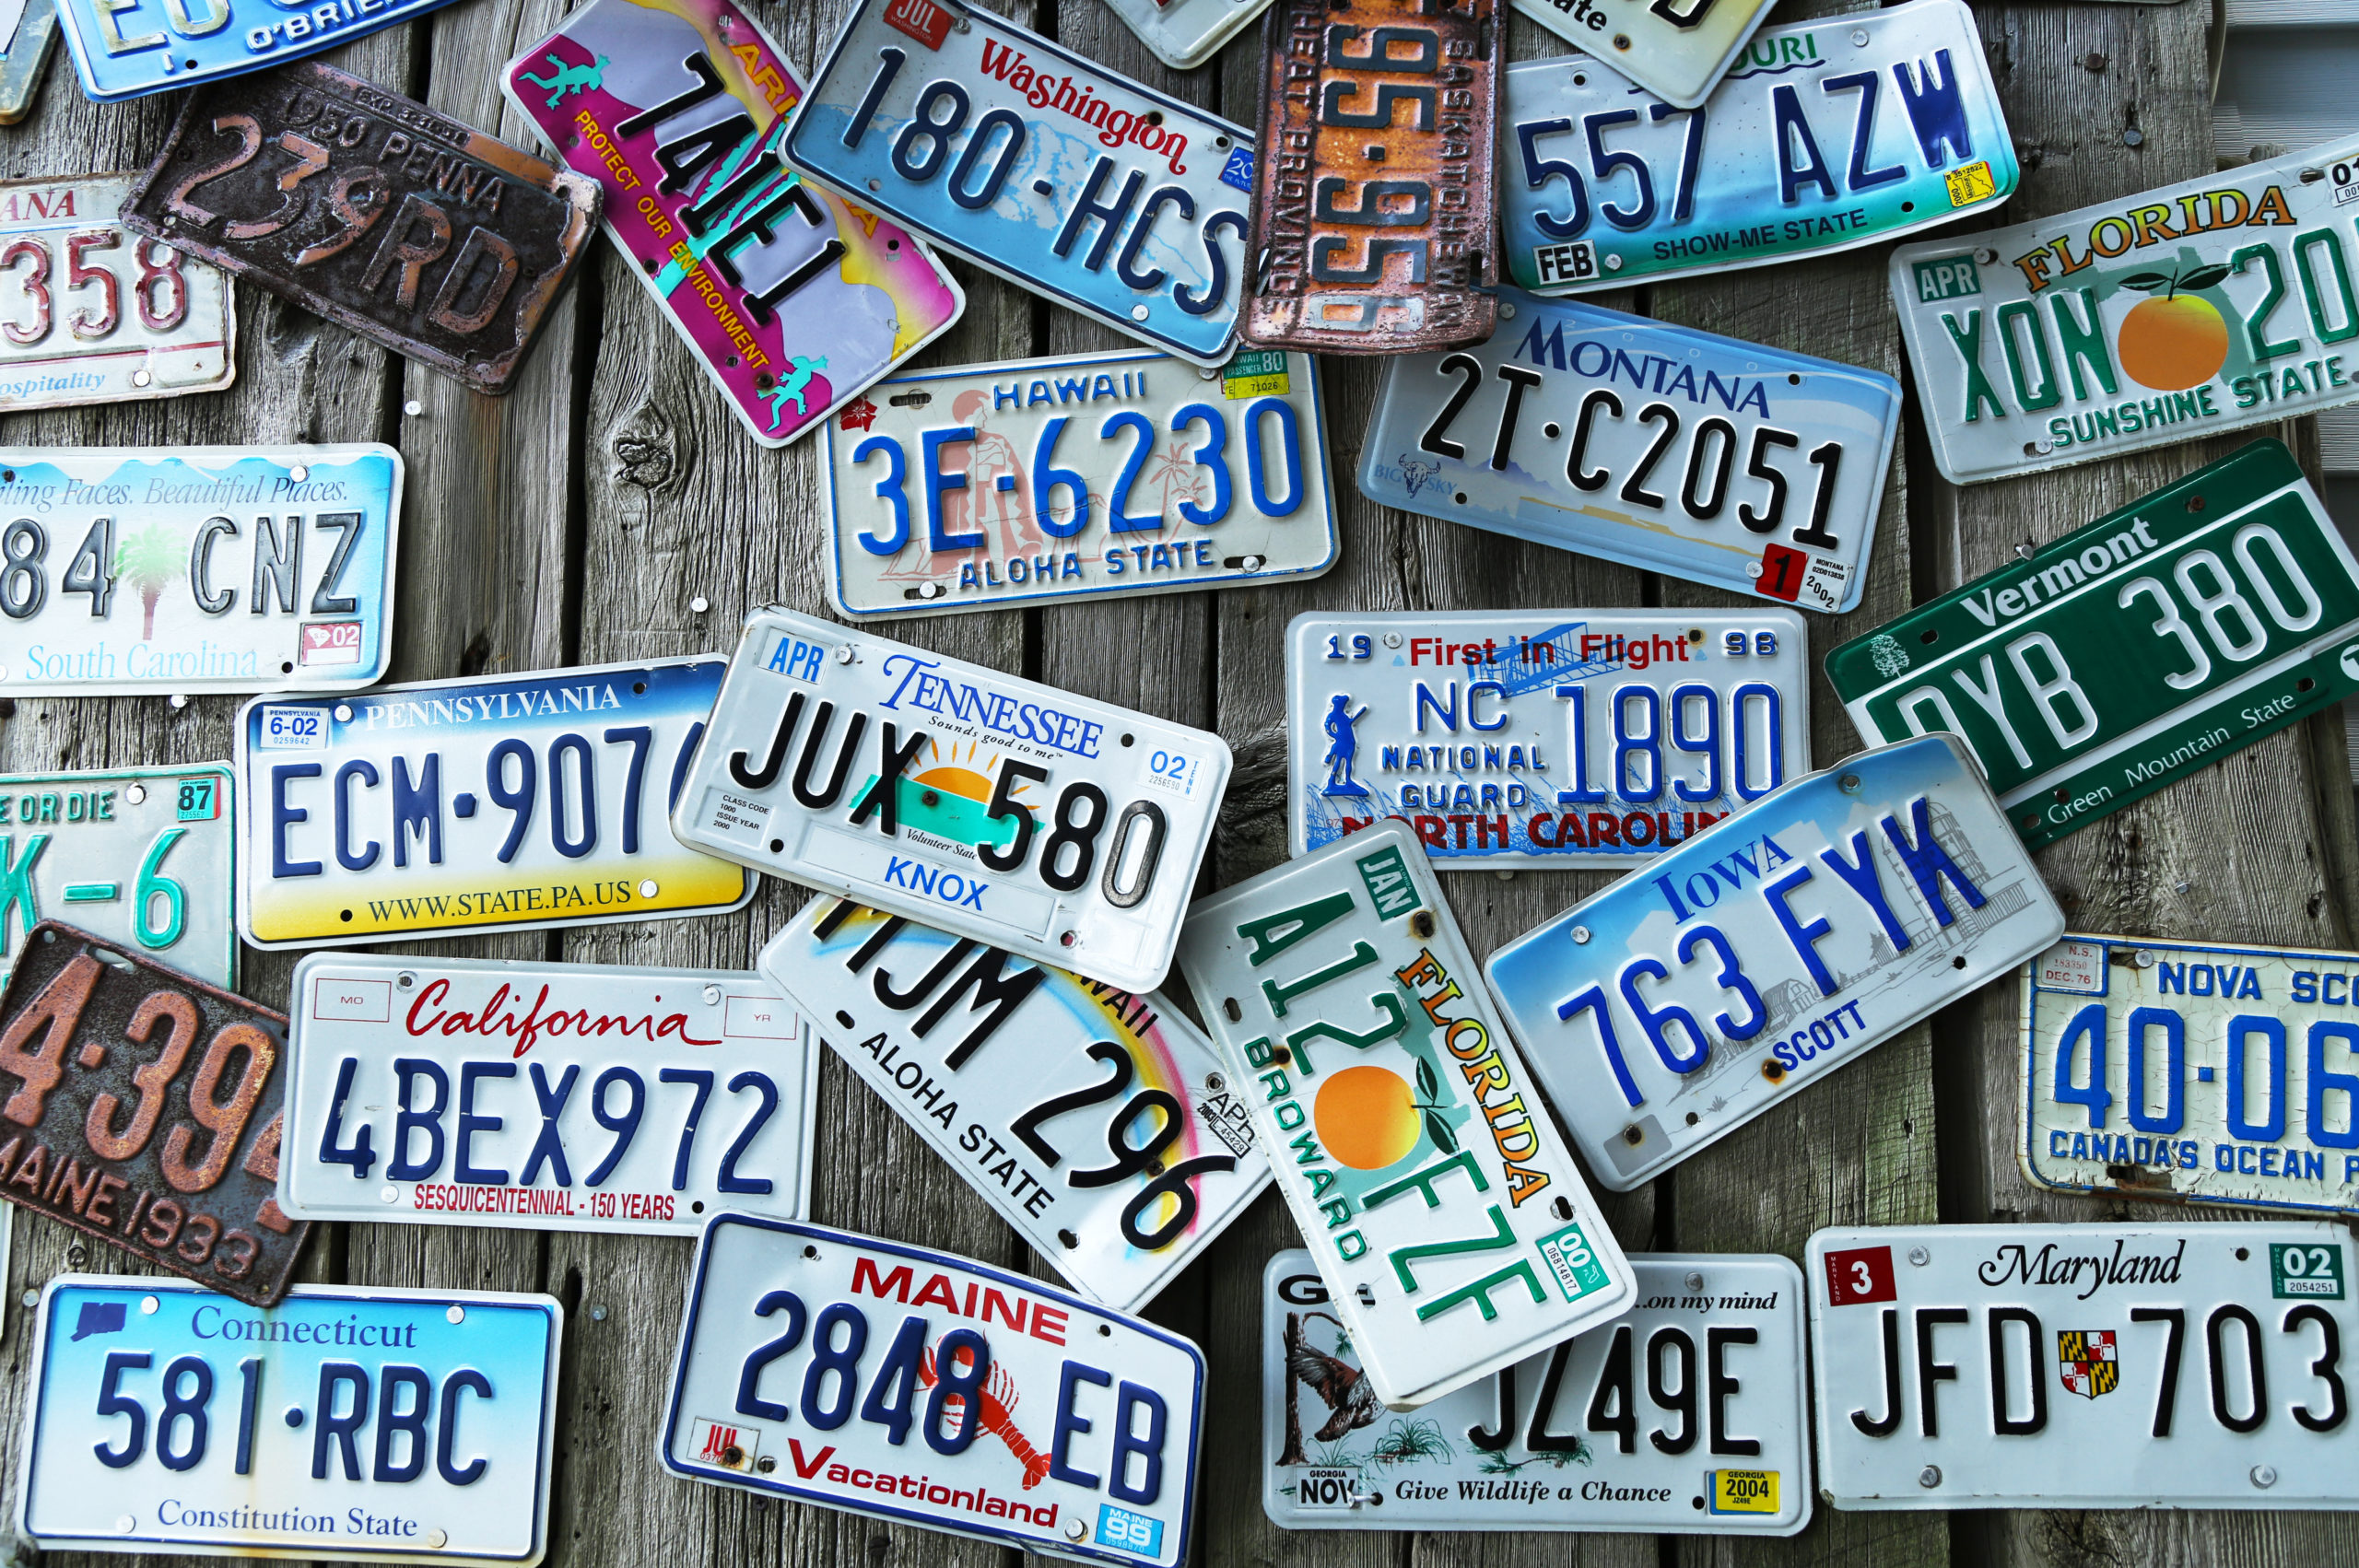 A collection of license plates used as a cover image for this report.